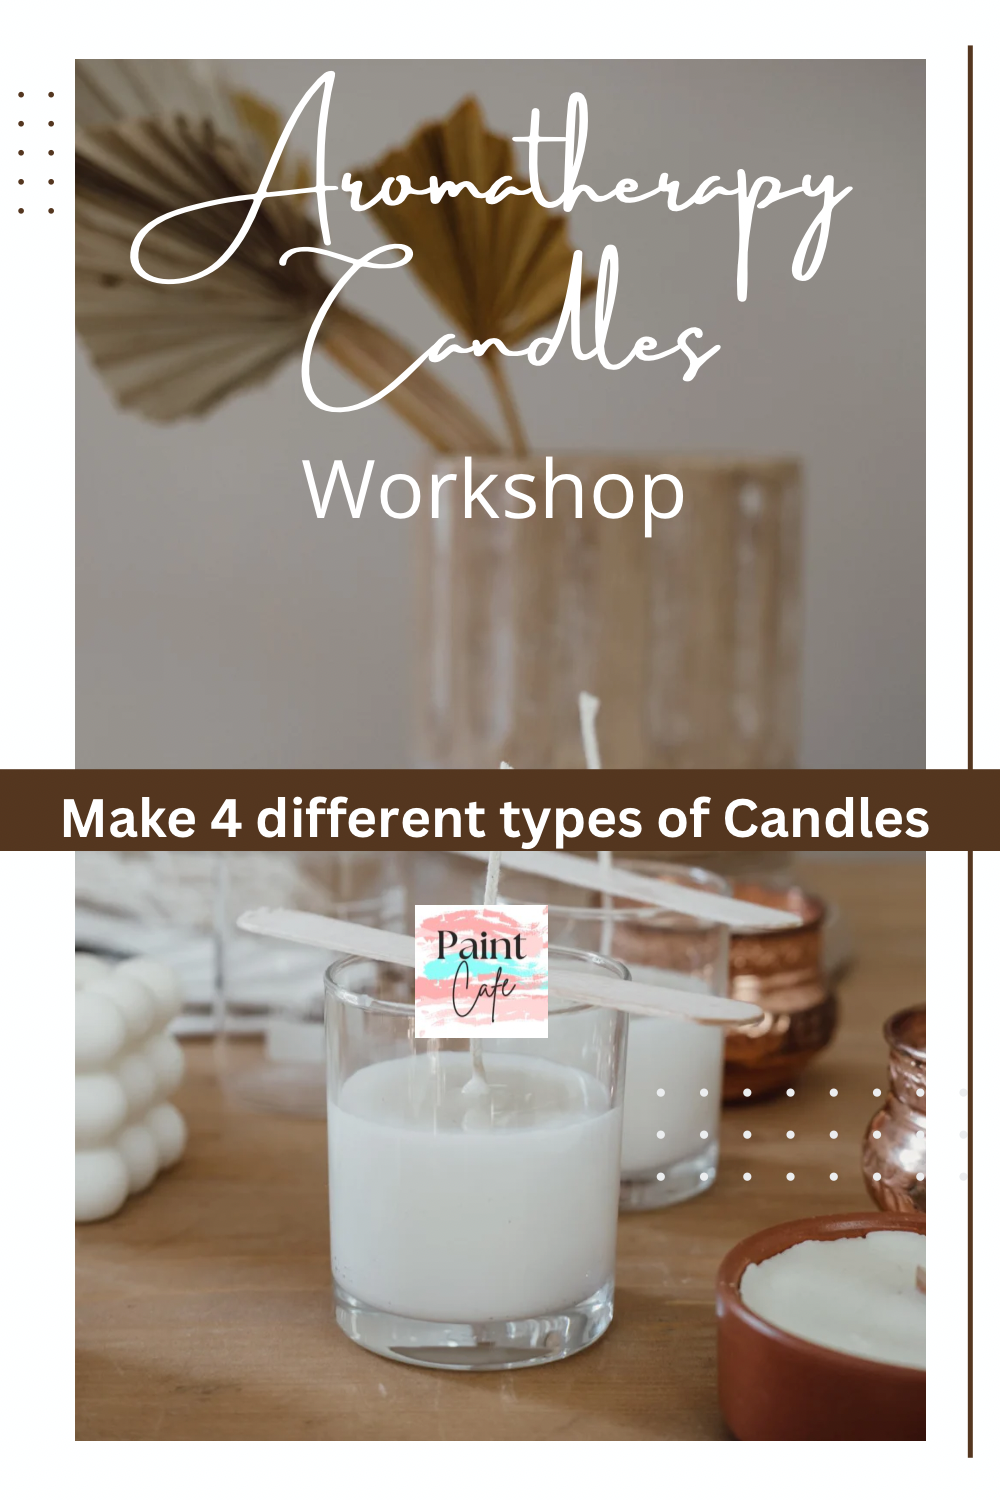 Candle Making Workshop (4 Candles)